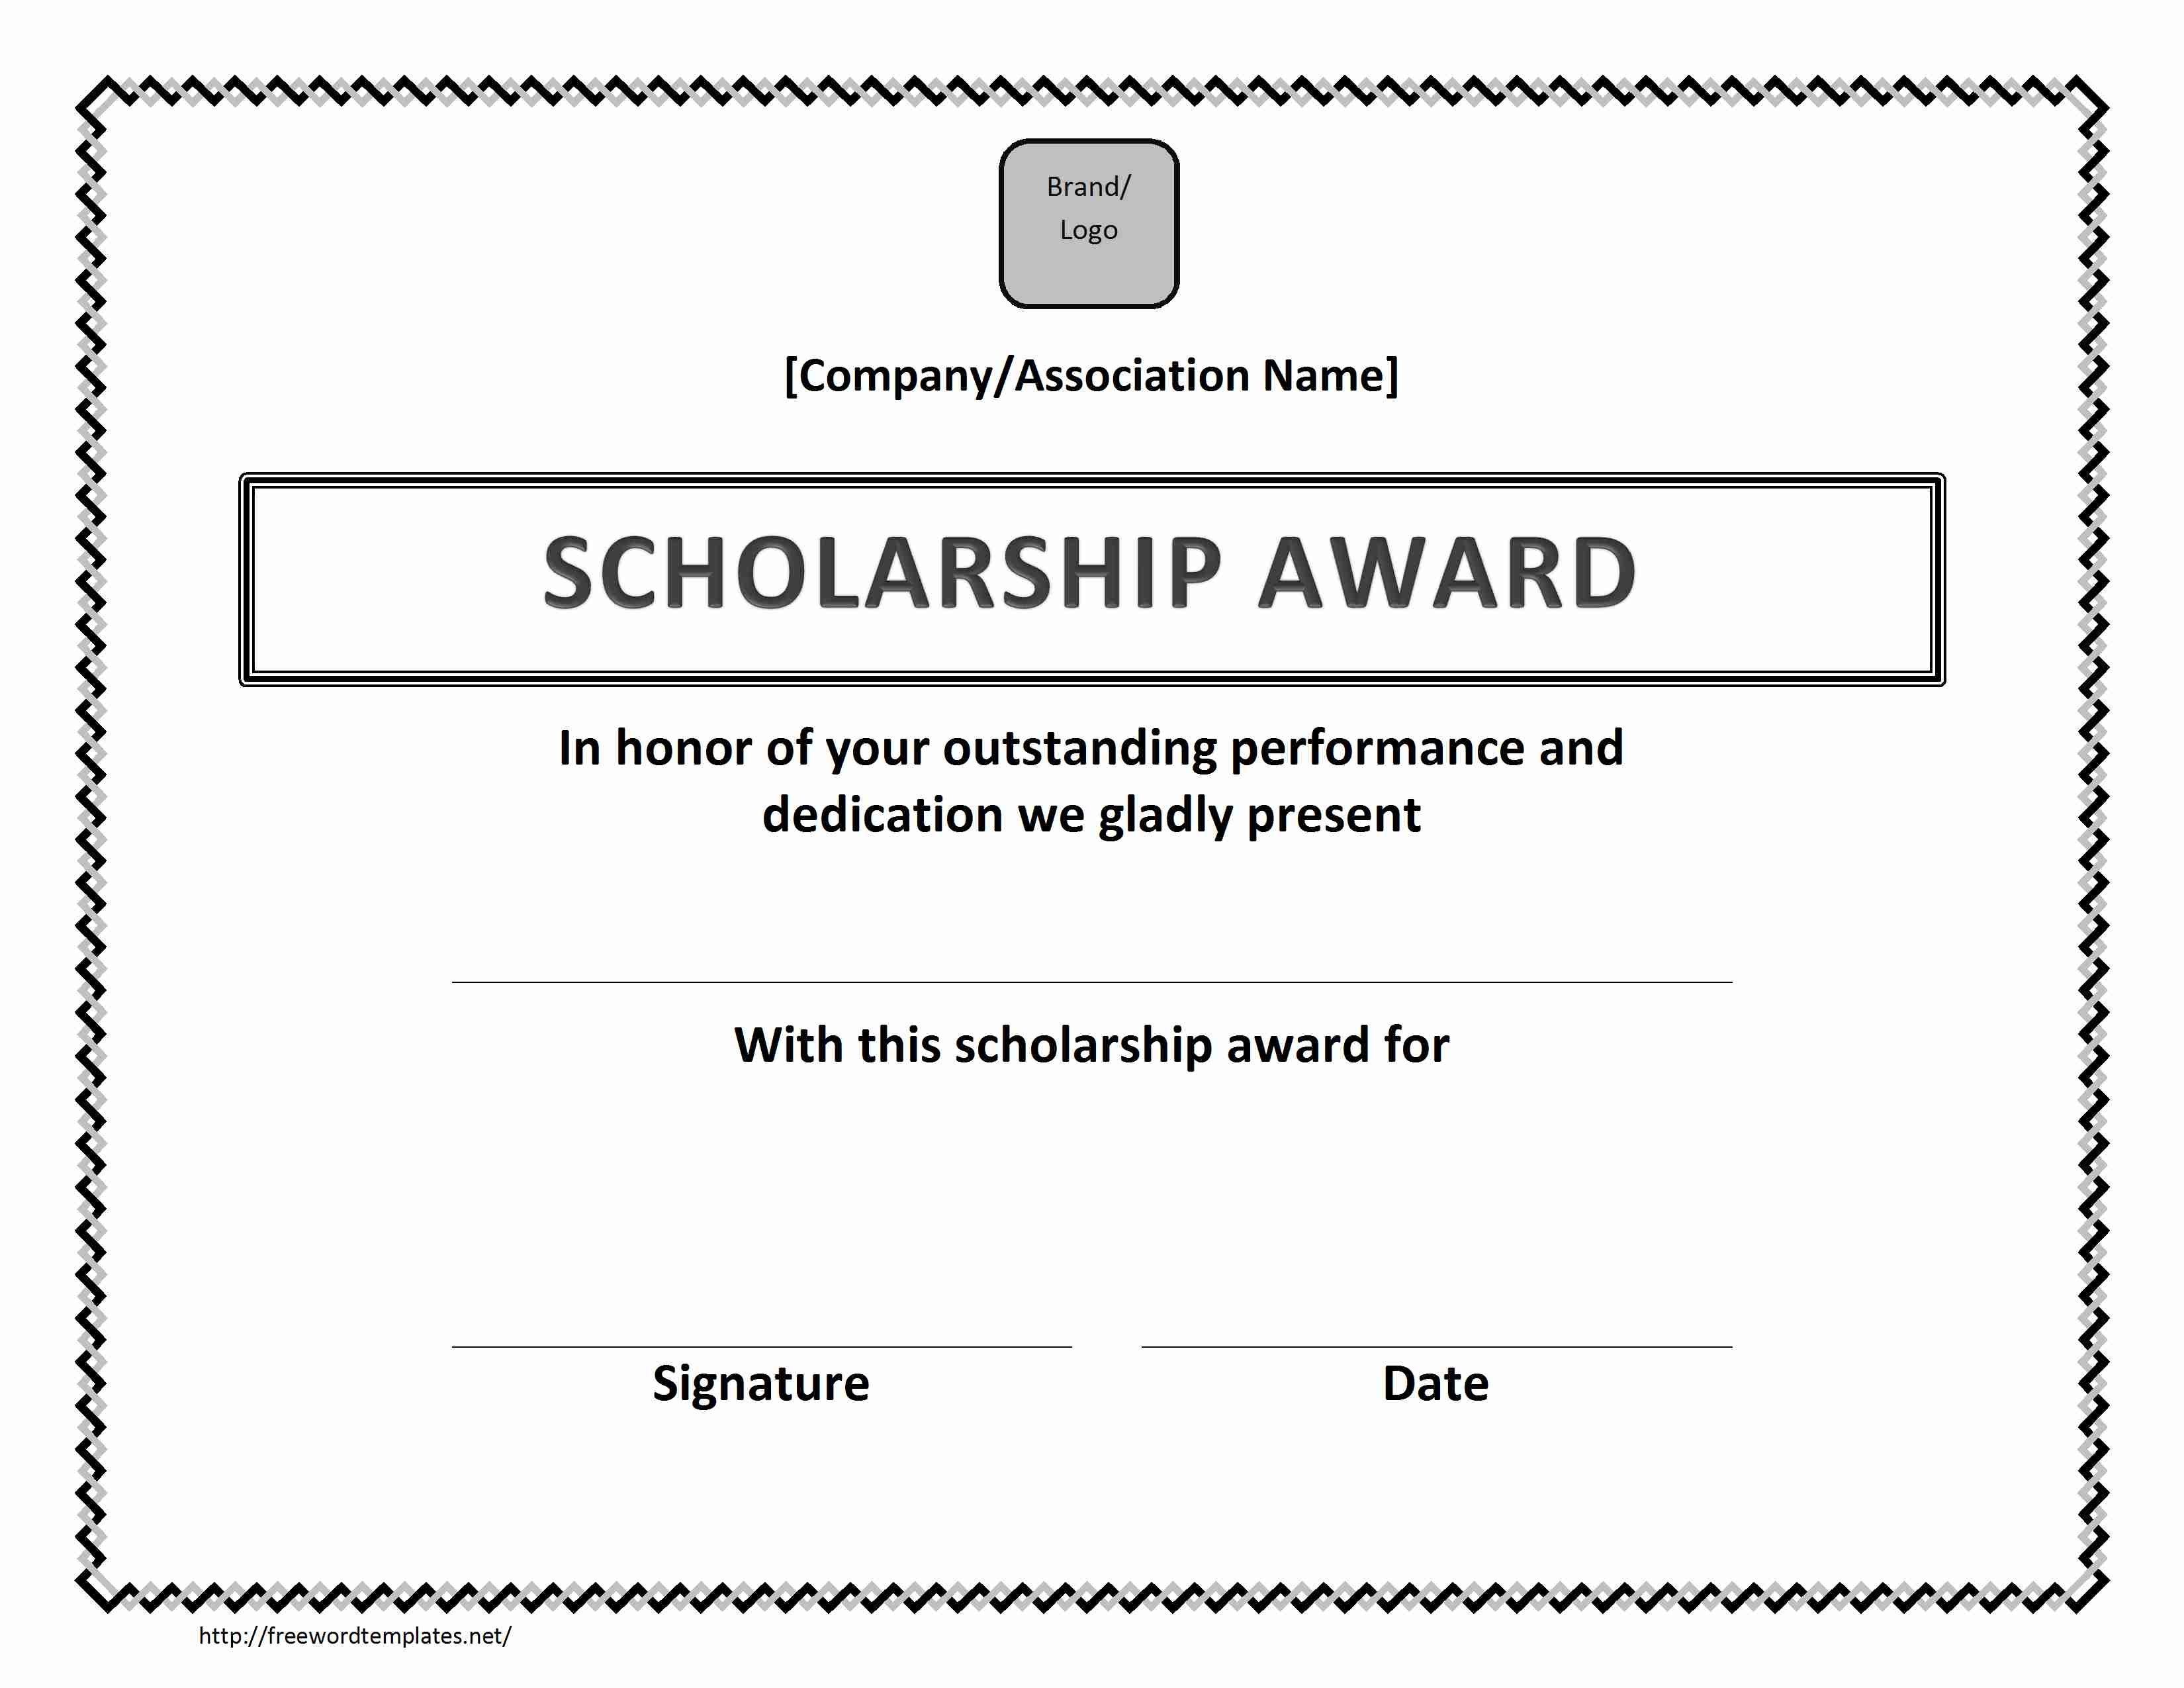 Scholarship Certificate Template Free Ukran Agdiffusion Com Formats For Certificates